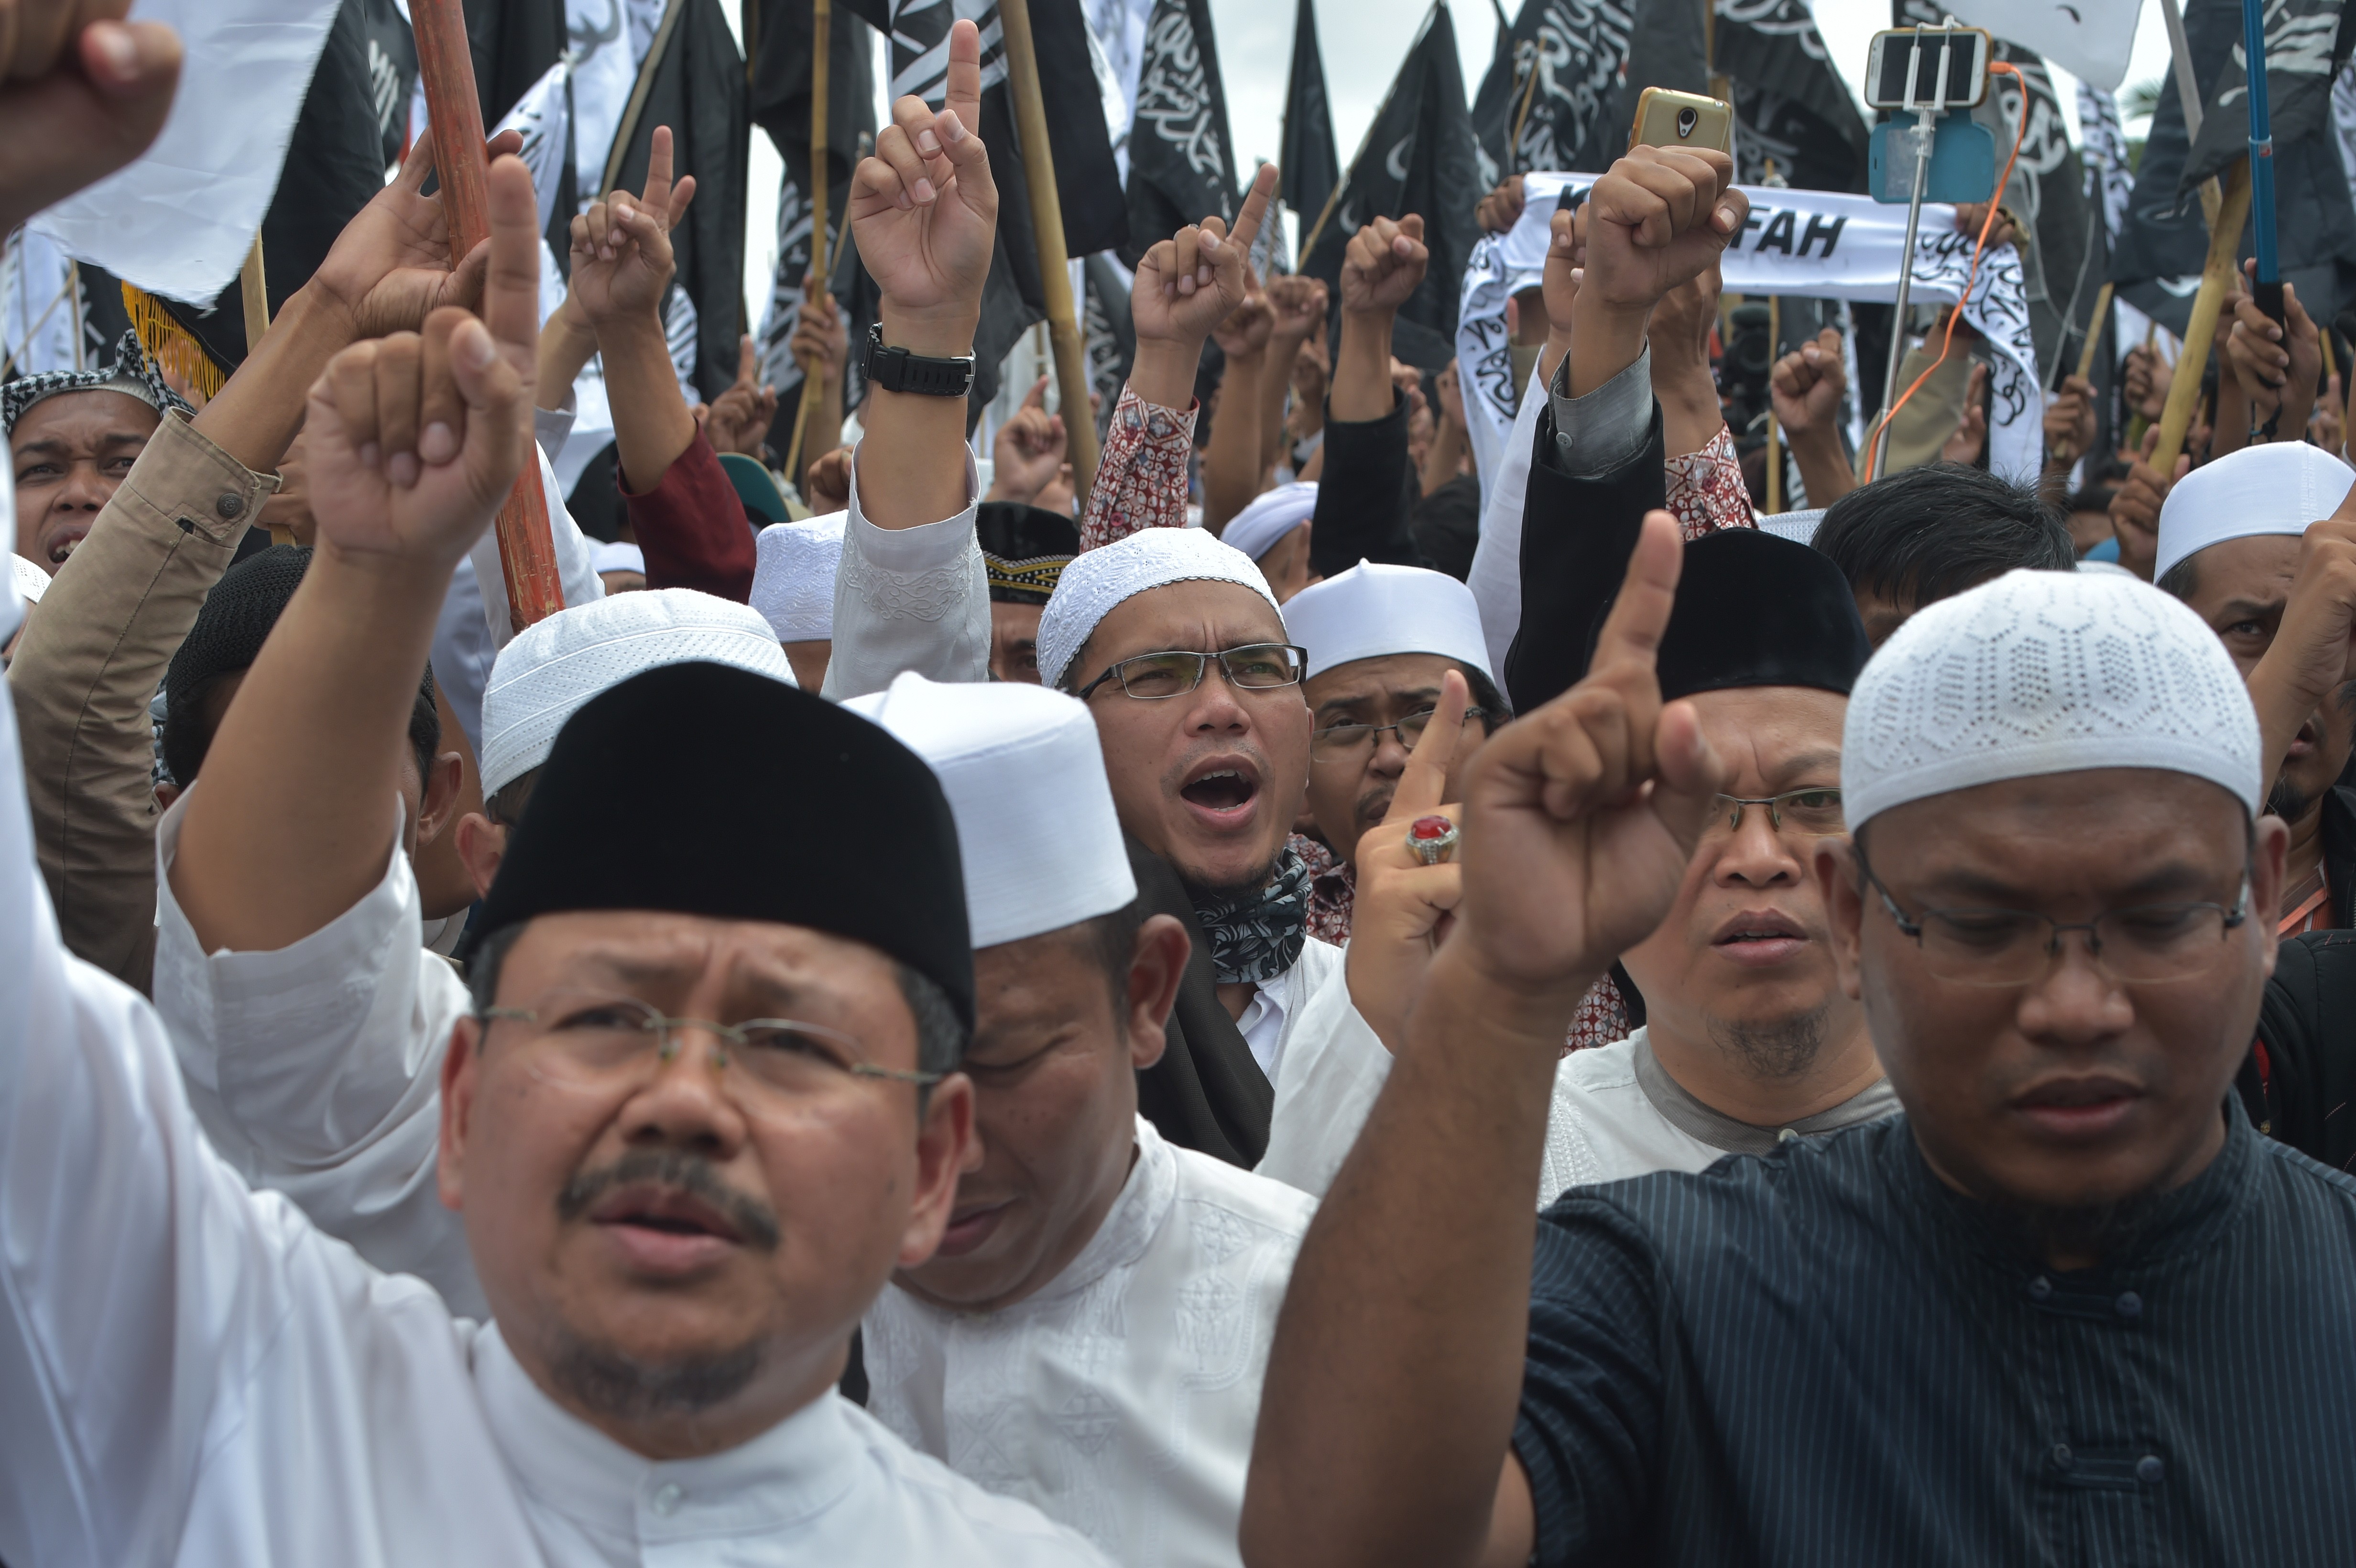 Jakarta has moved to disband Hizb ut-Tahrir, the hardline group that wants to establish a caliphate, but other factors suggest a growing presence of Islamist influence